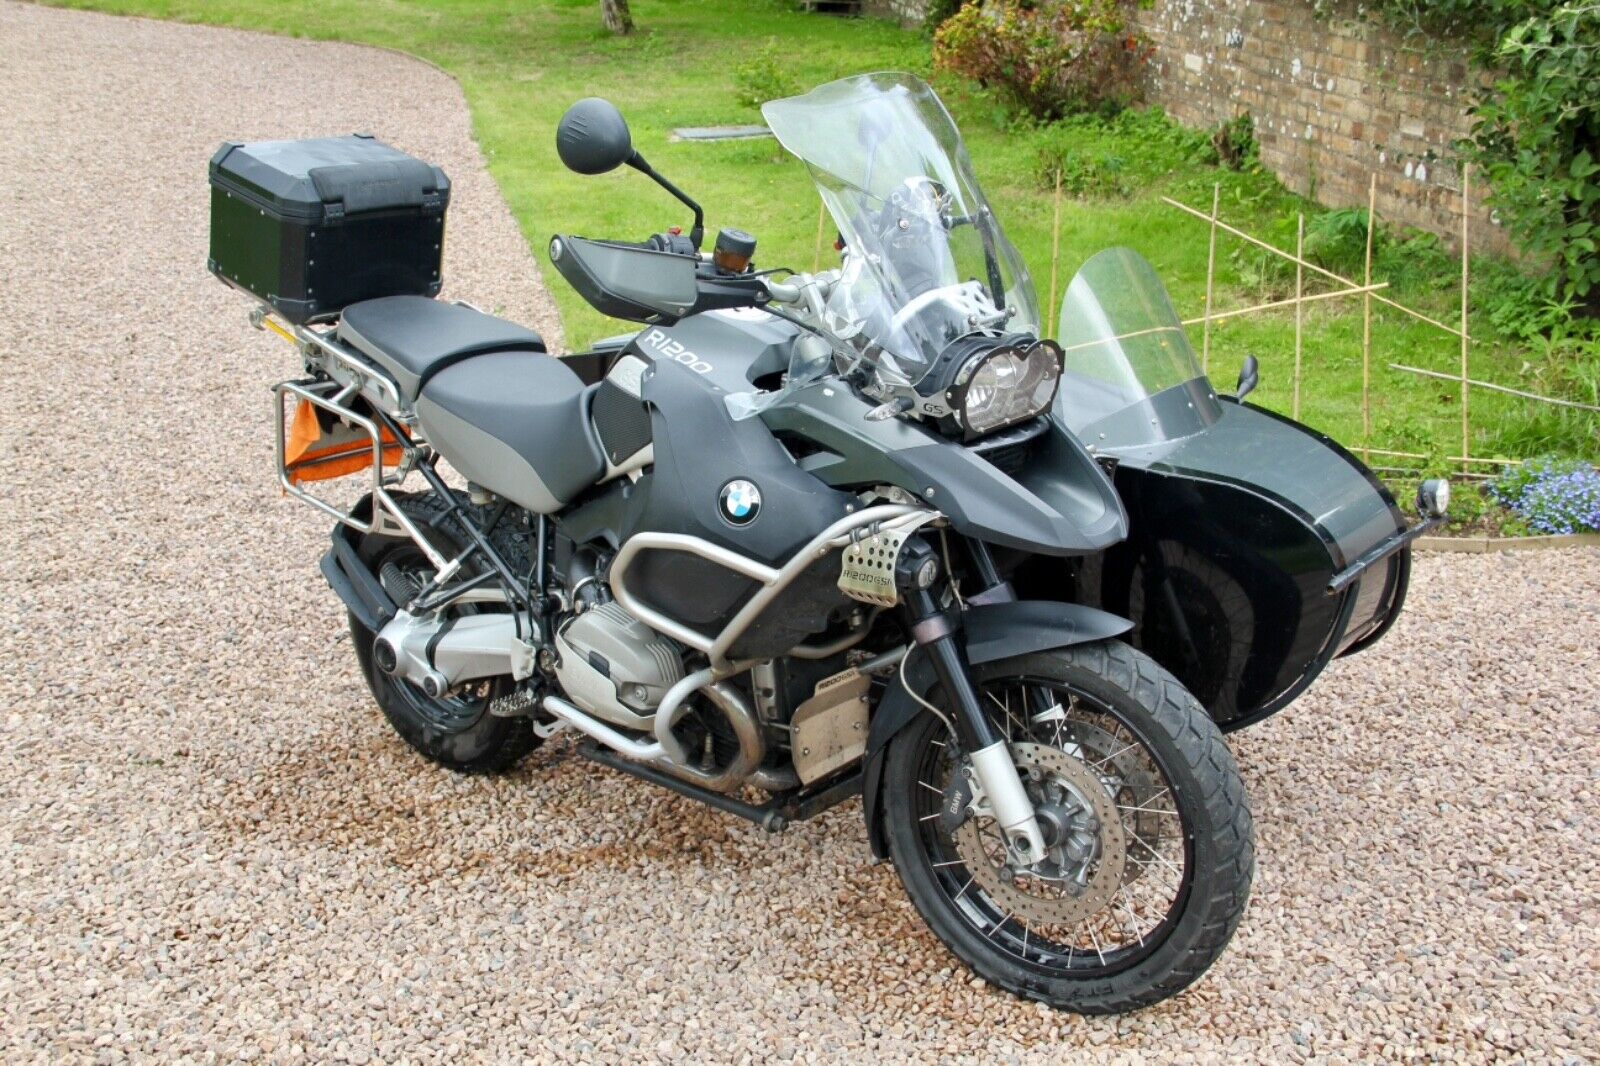 Image 1 - BMW R1200GS Adventure 2011 Motorcycle & Sidecar